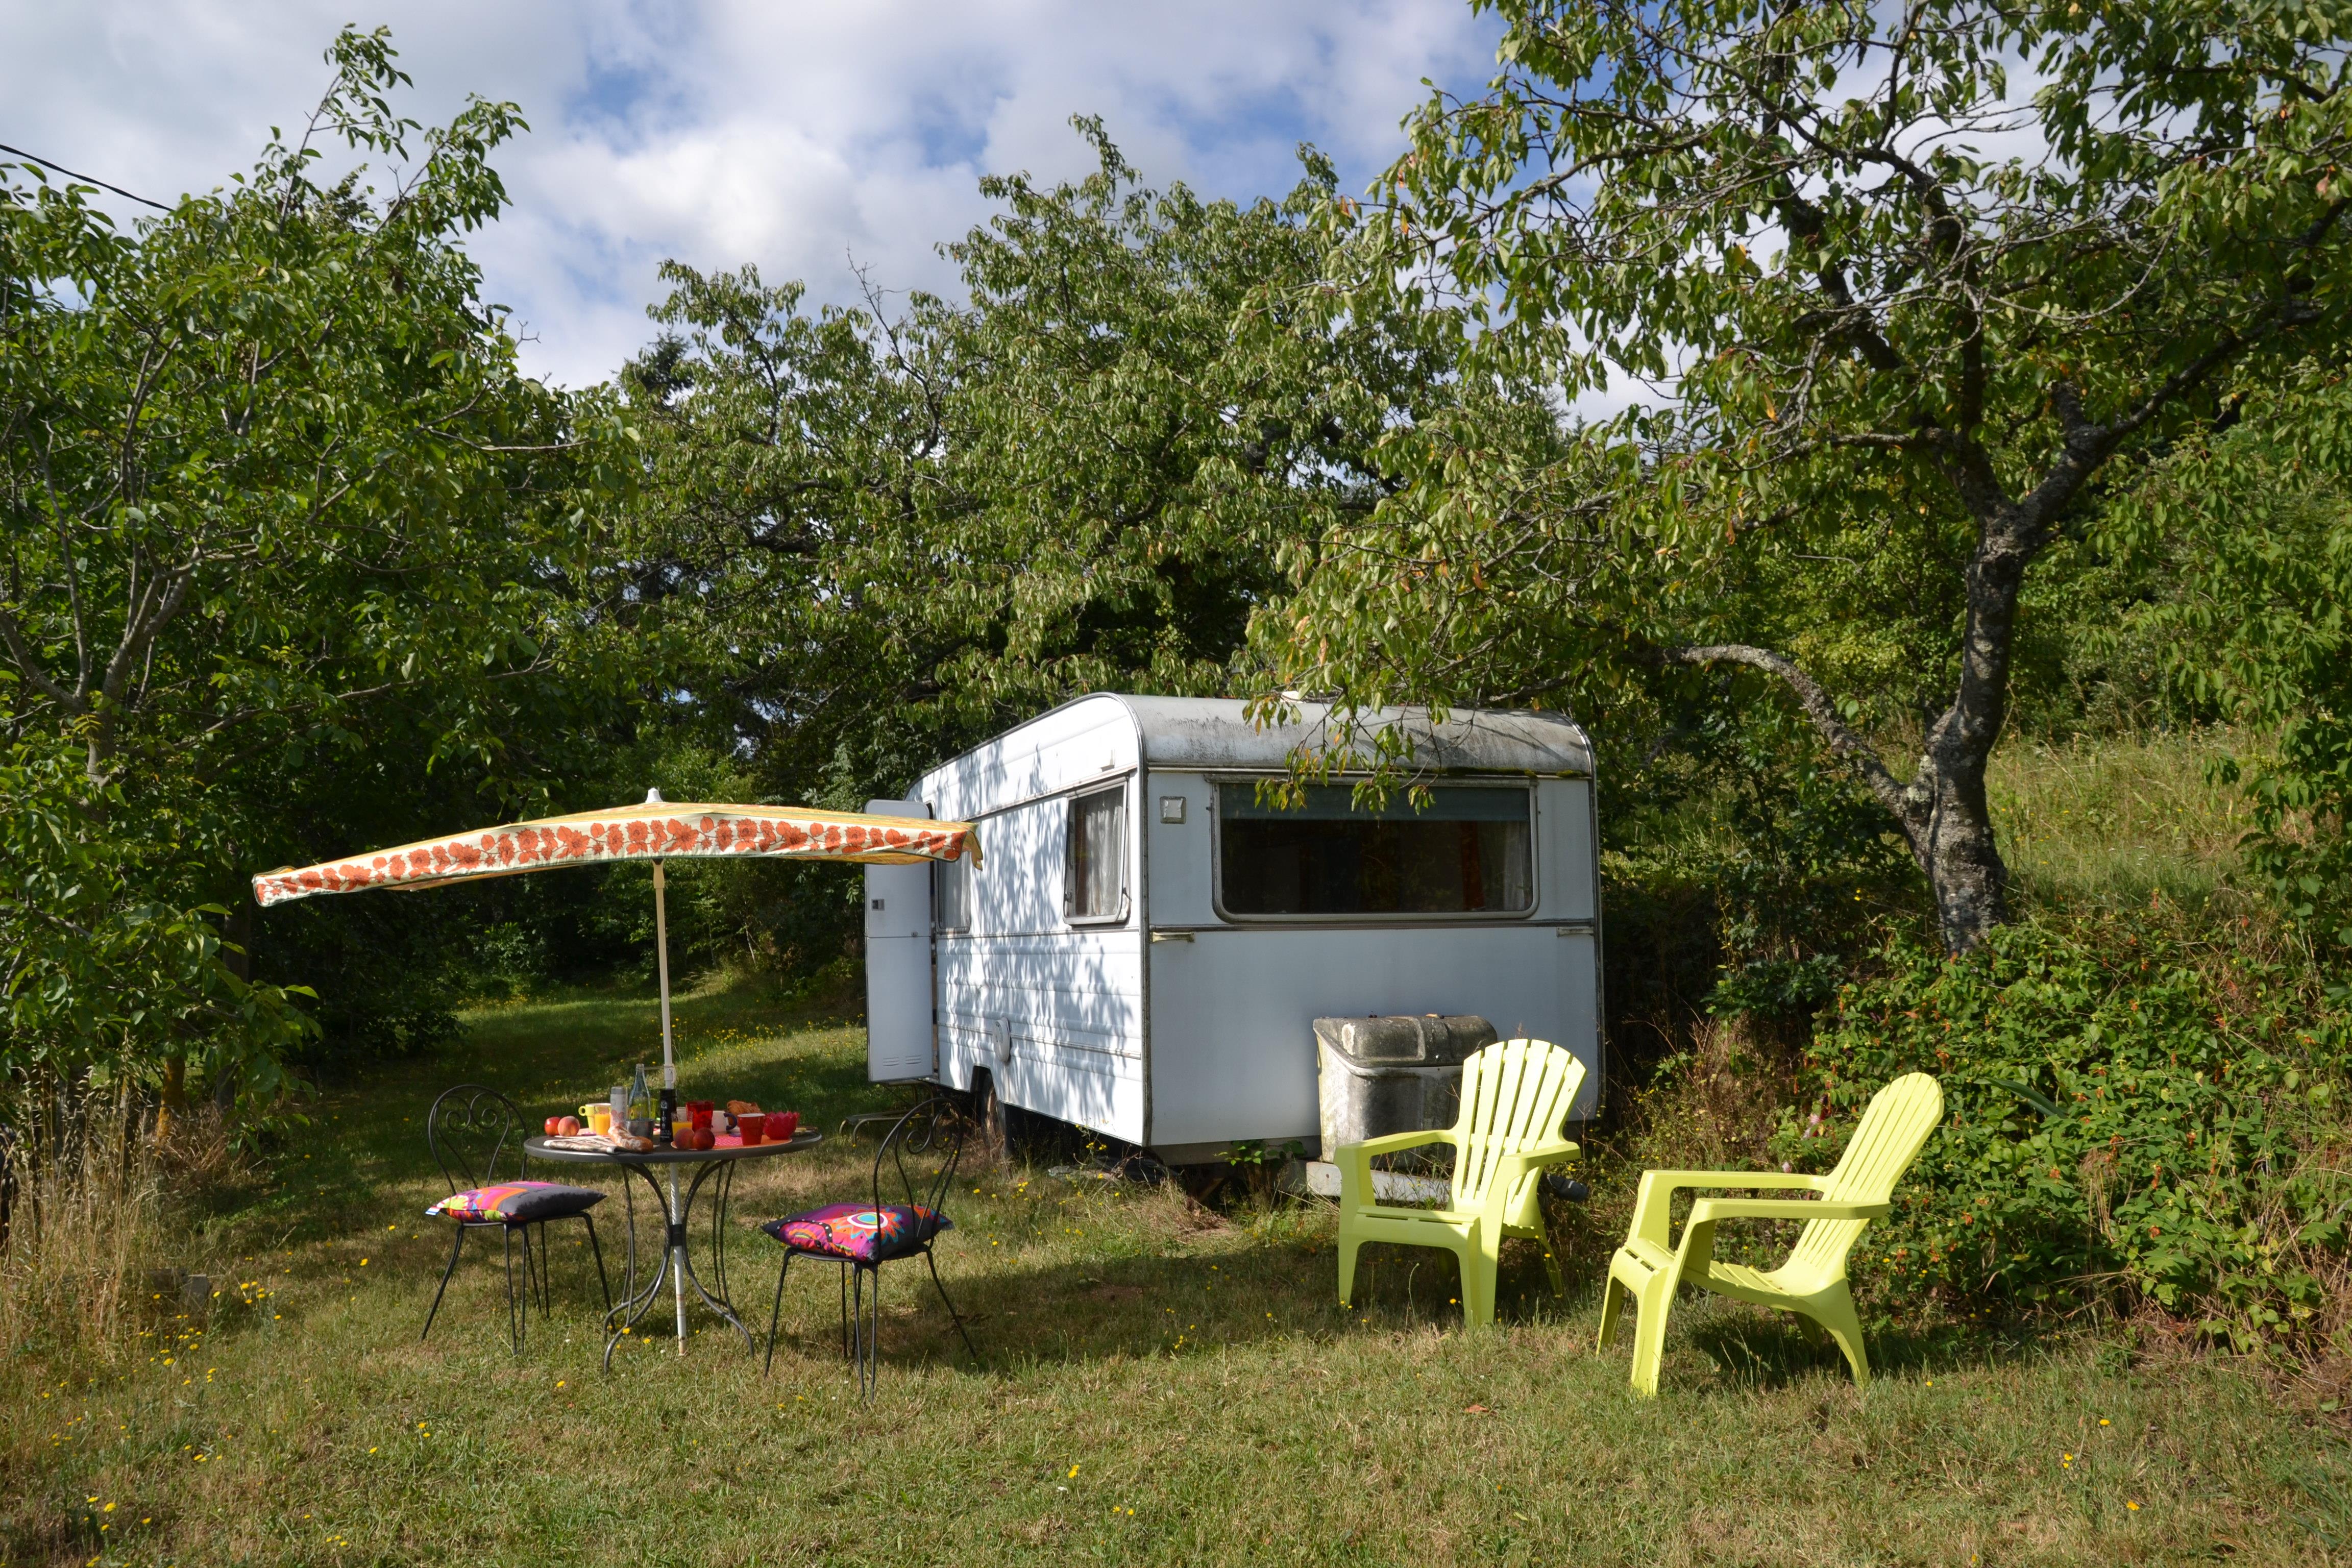 Accommodation - Equipped Caravan Stove , Sink, And Electricity. Location  5 Located 50M With Sanitary Toilets , Hot Showers , Dishwashing Sinks And Tub . No Close Neighbors . Sheets Extra. - Aire naturelle de Camping La Ferme aux Cerisiers